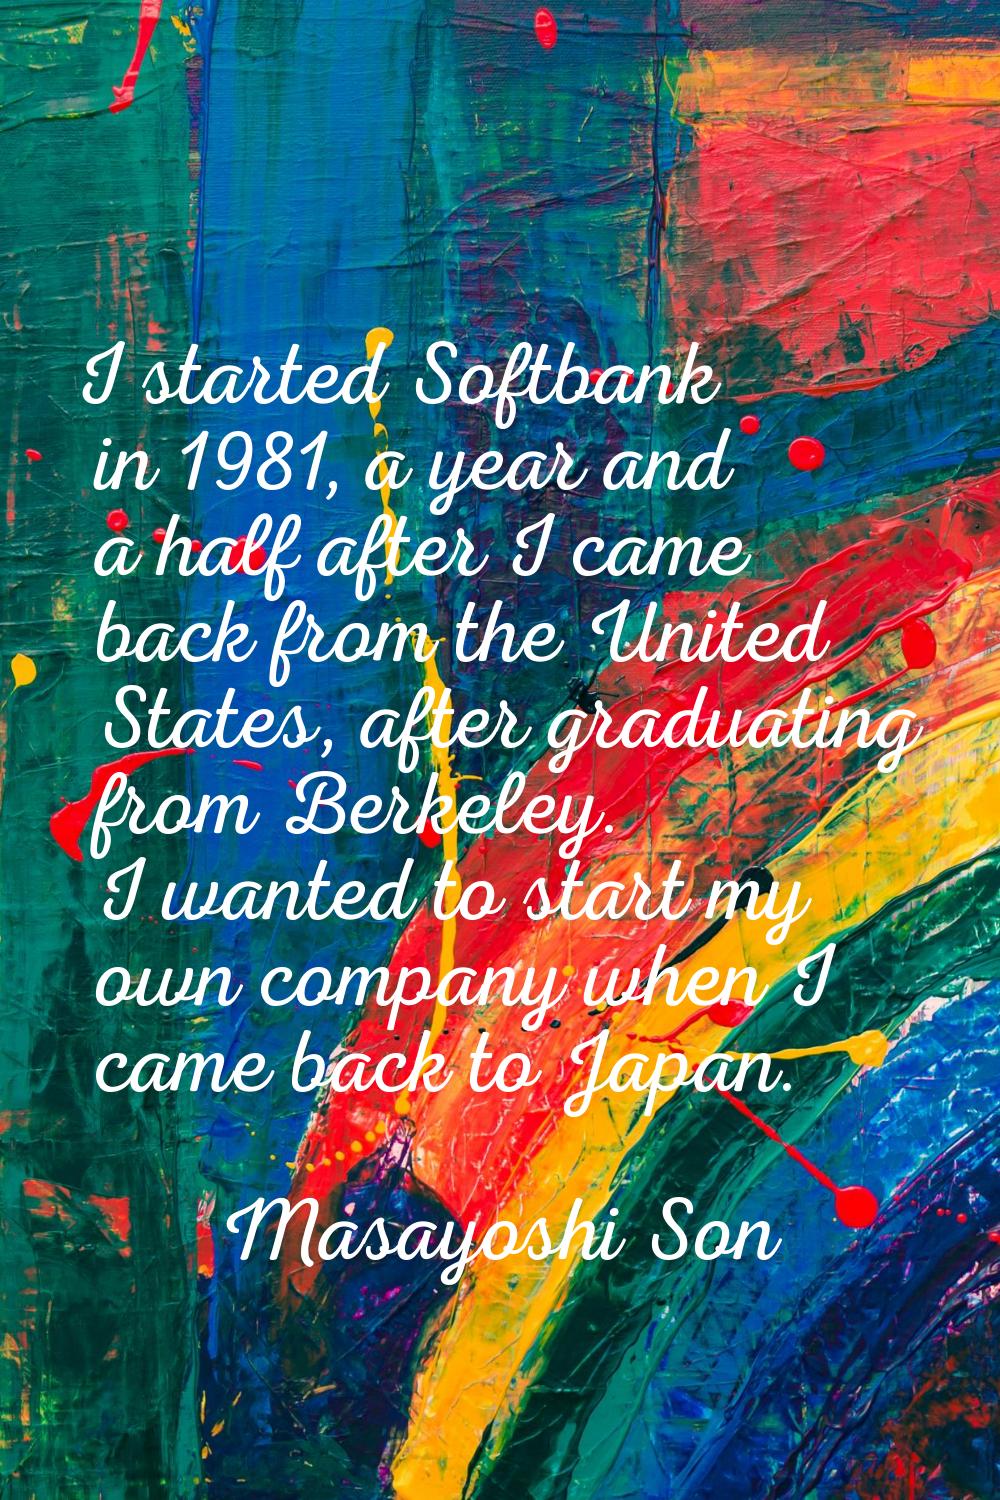 I started Softbank in 1981, a year and a half after I came back from the United States, after gradu